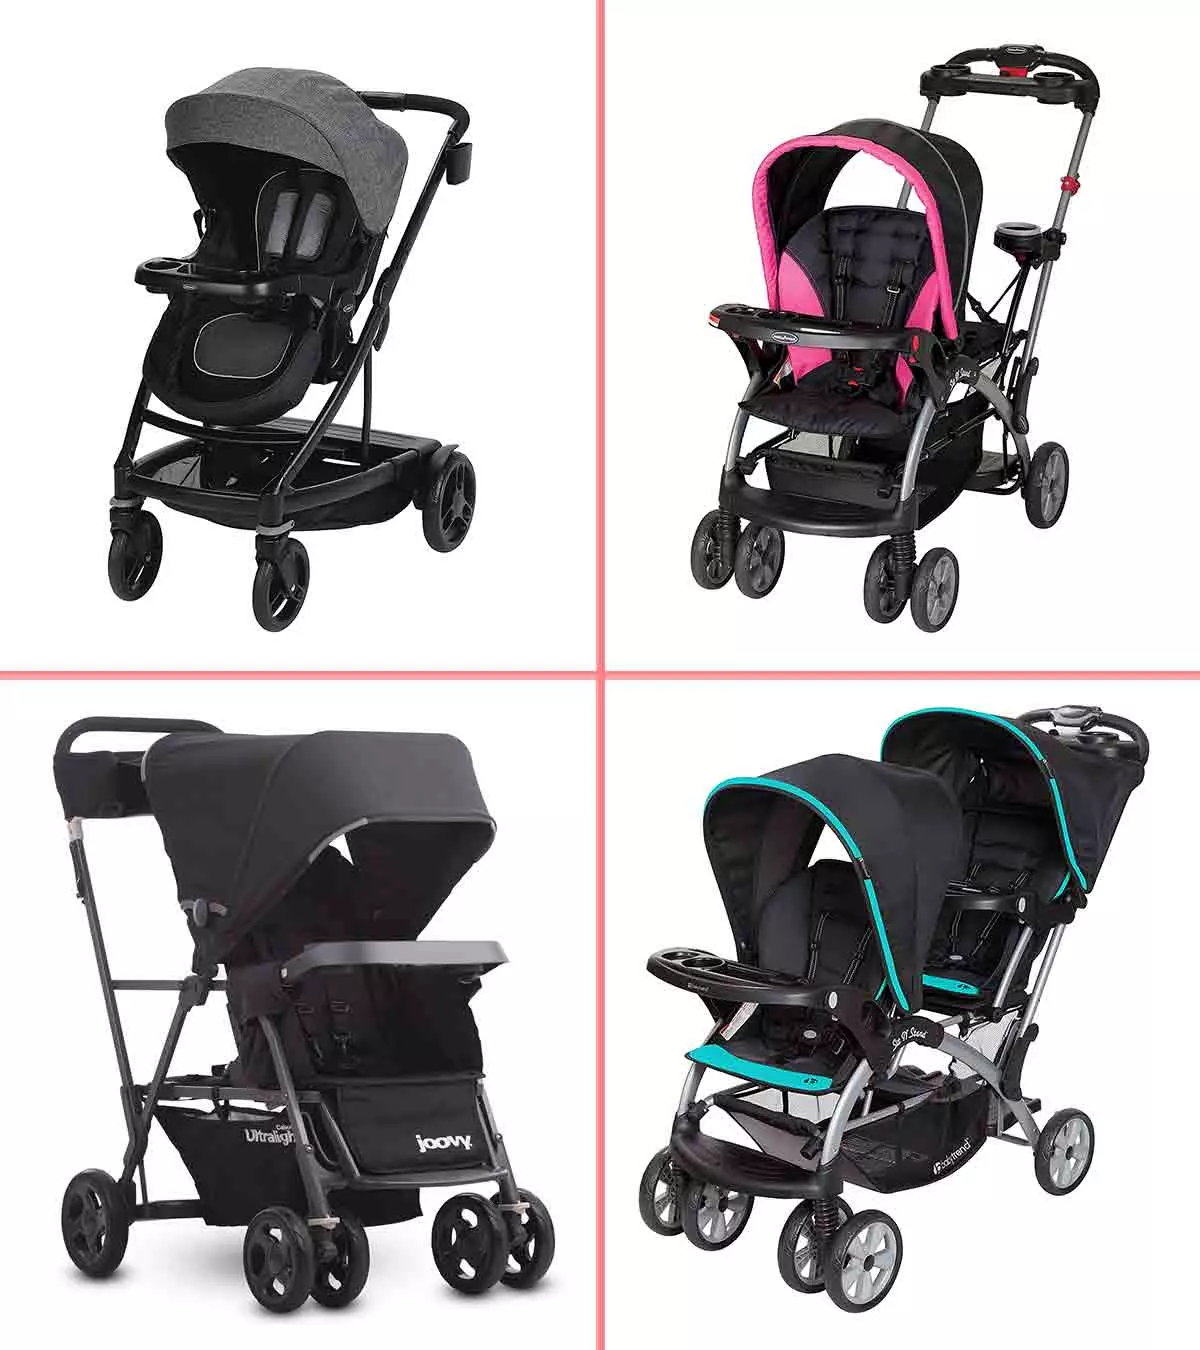 11 Best Sit and Stand Strollers In 2020